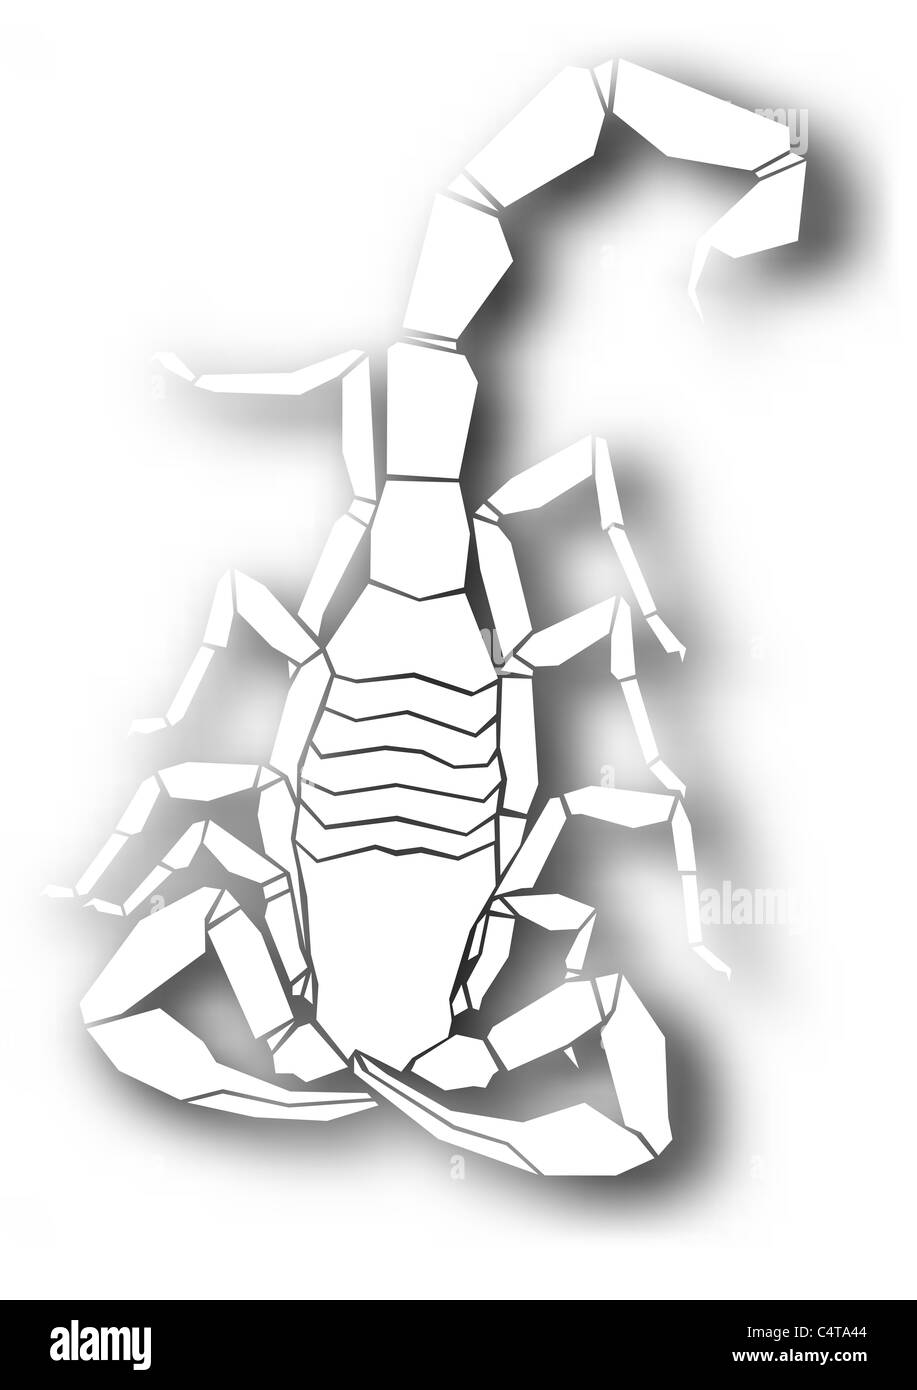 Illustrated design of a cutout scorpion with shadow Stock Photo